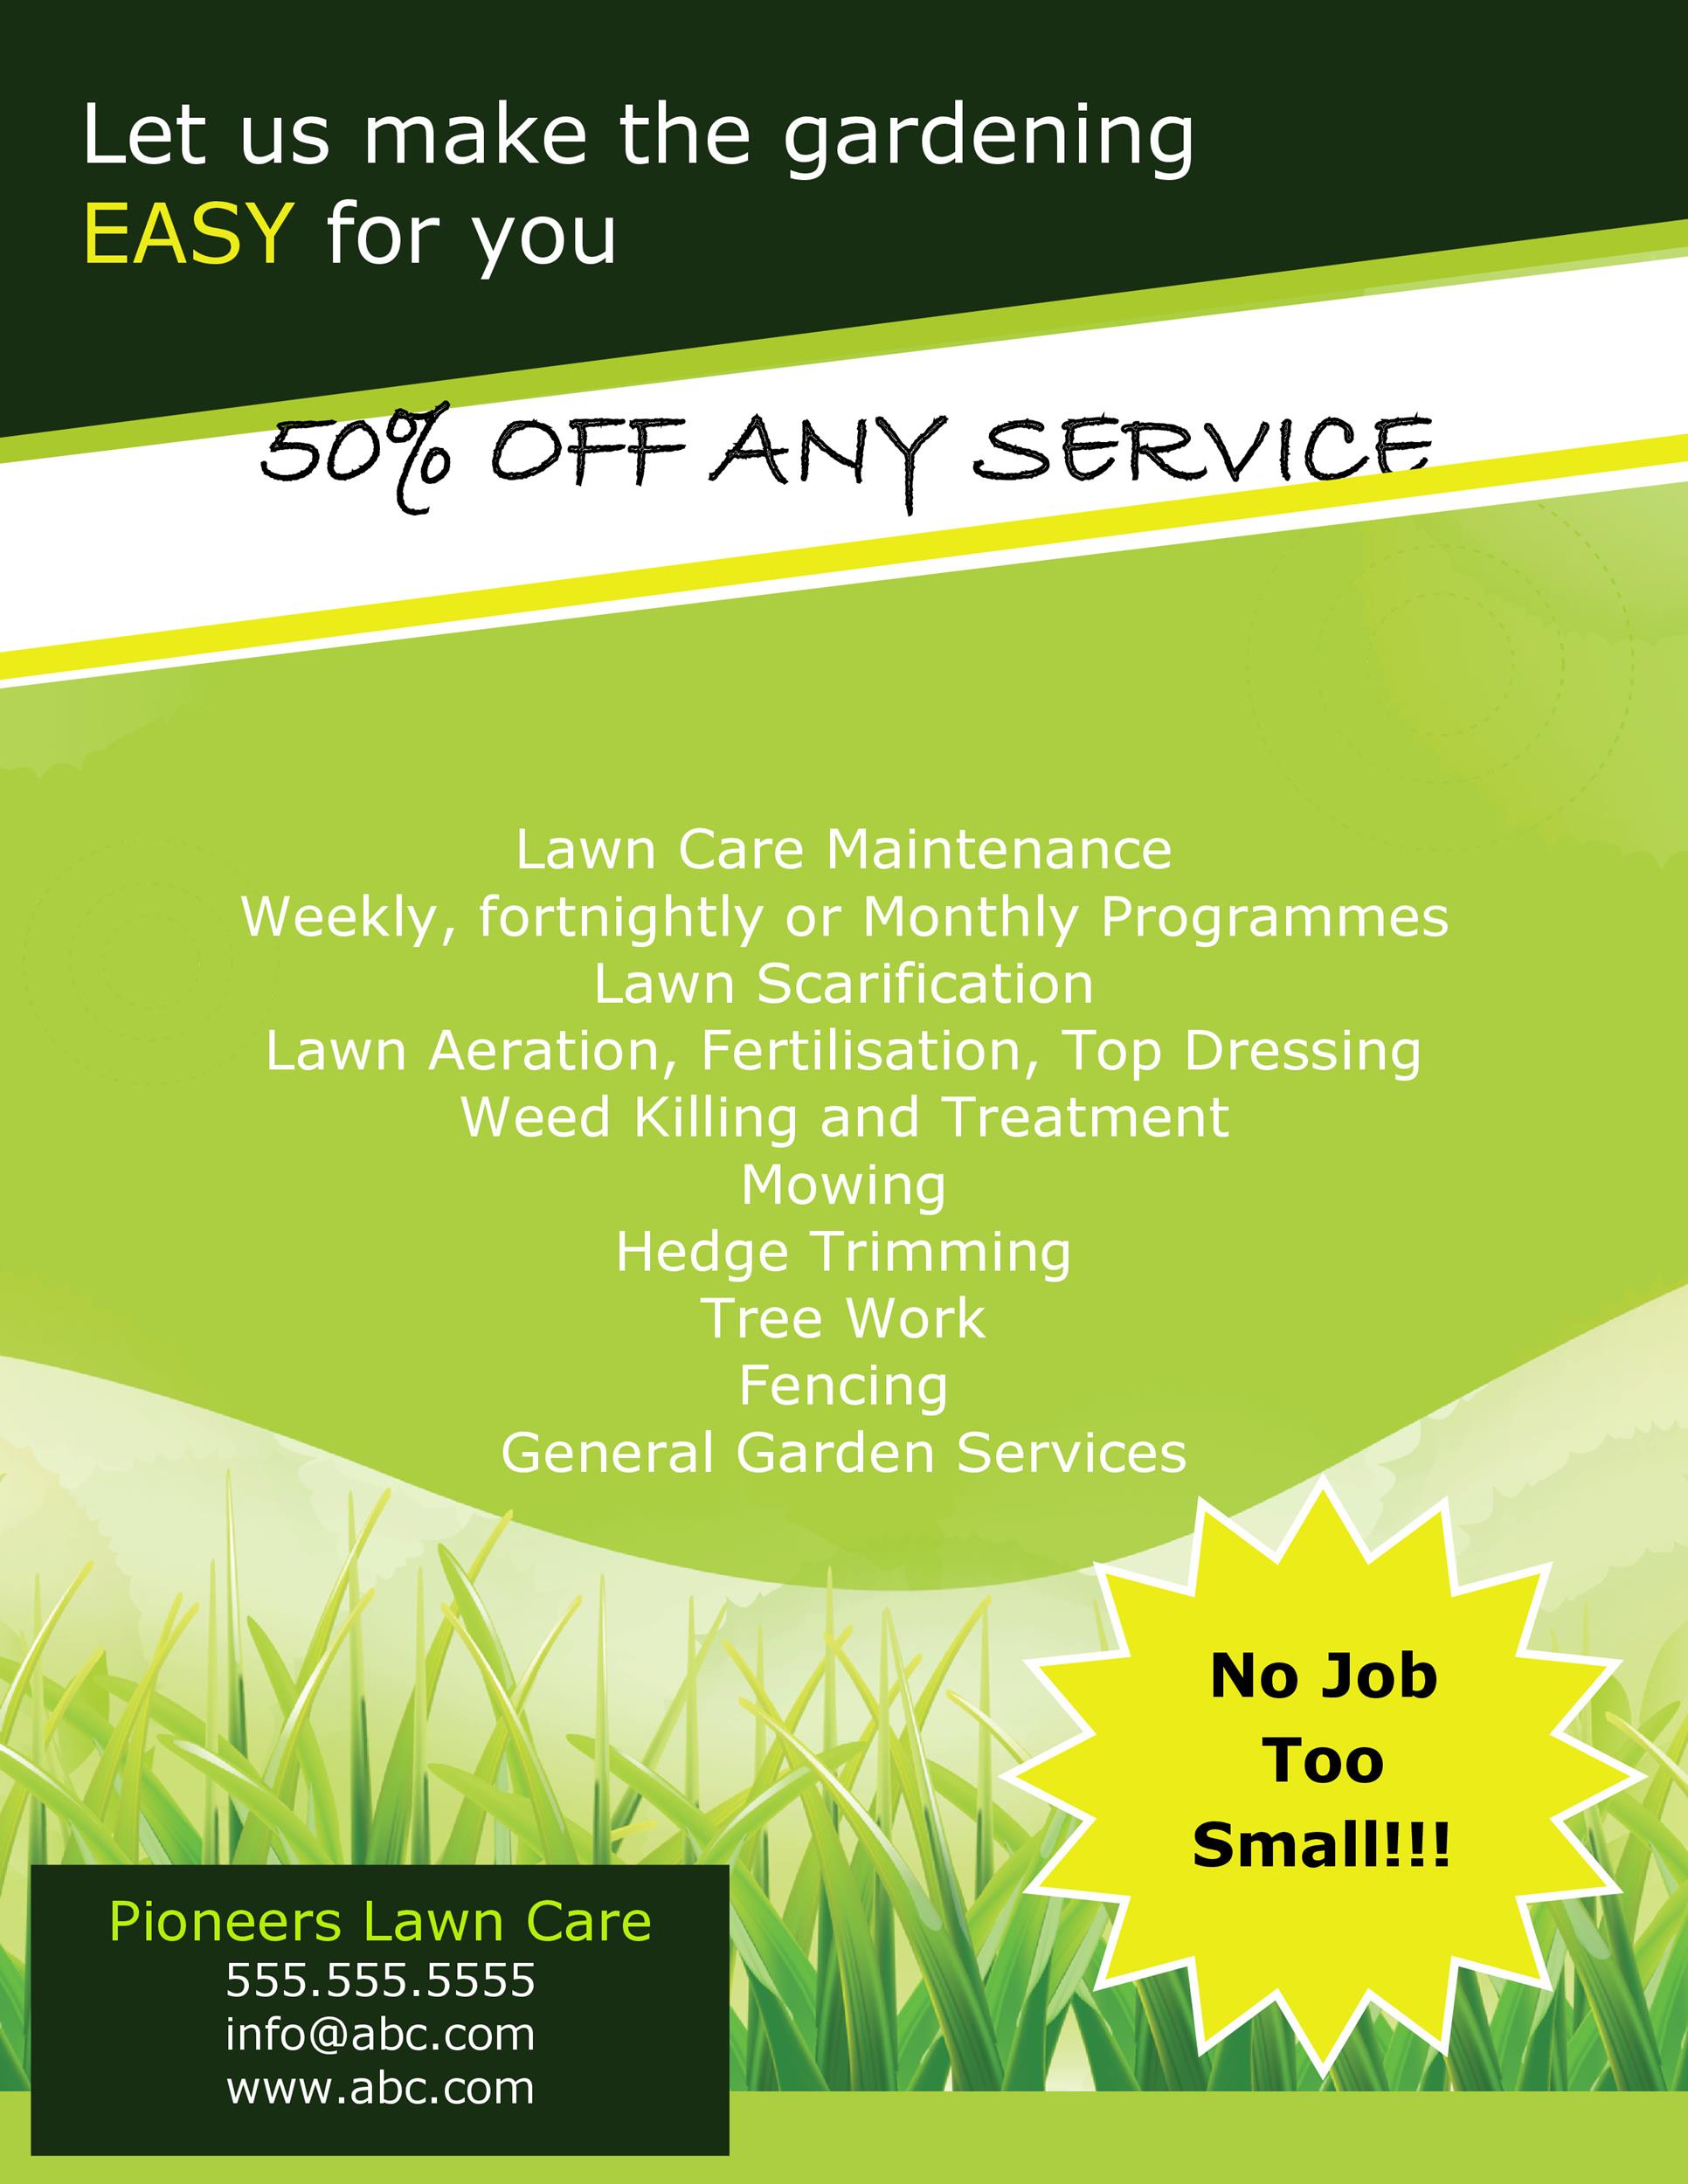 30 Free Lawn Care Flyer Templates [Lawn Mower Flyers] ᐅ TemplateLab